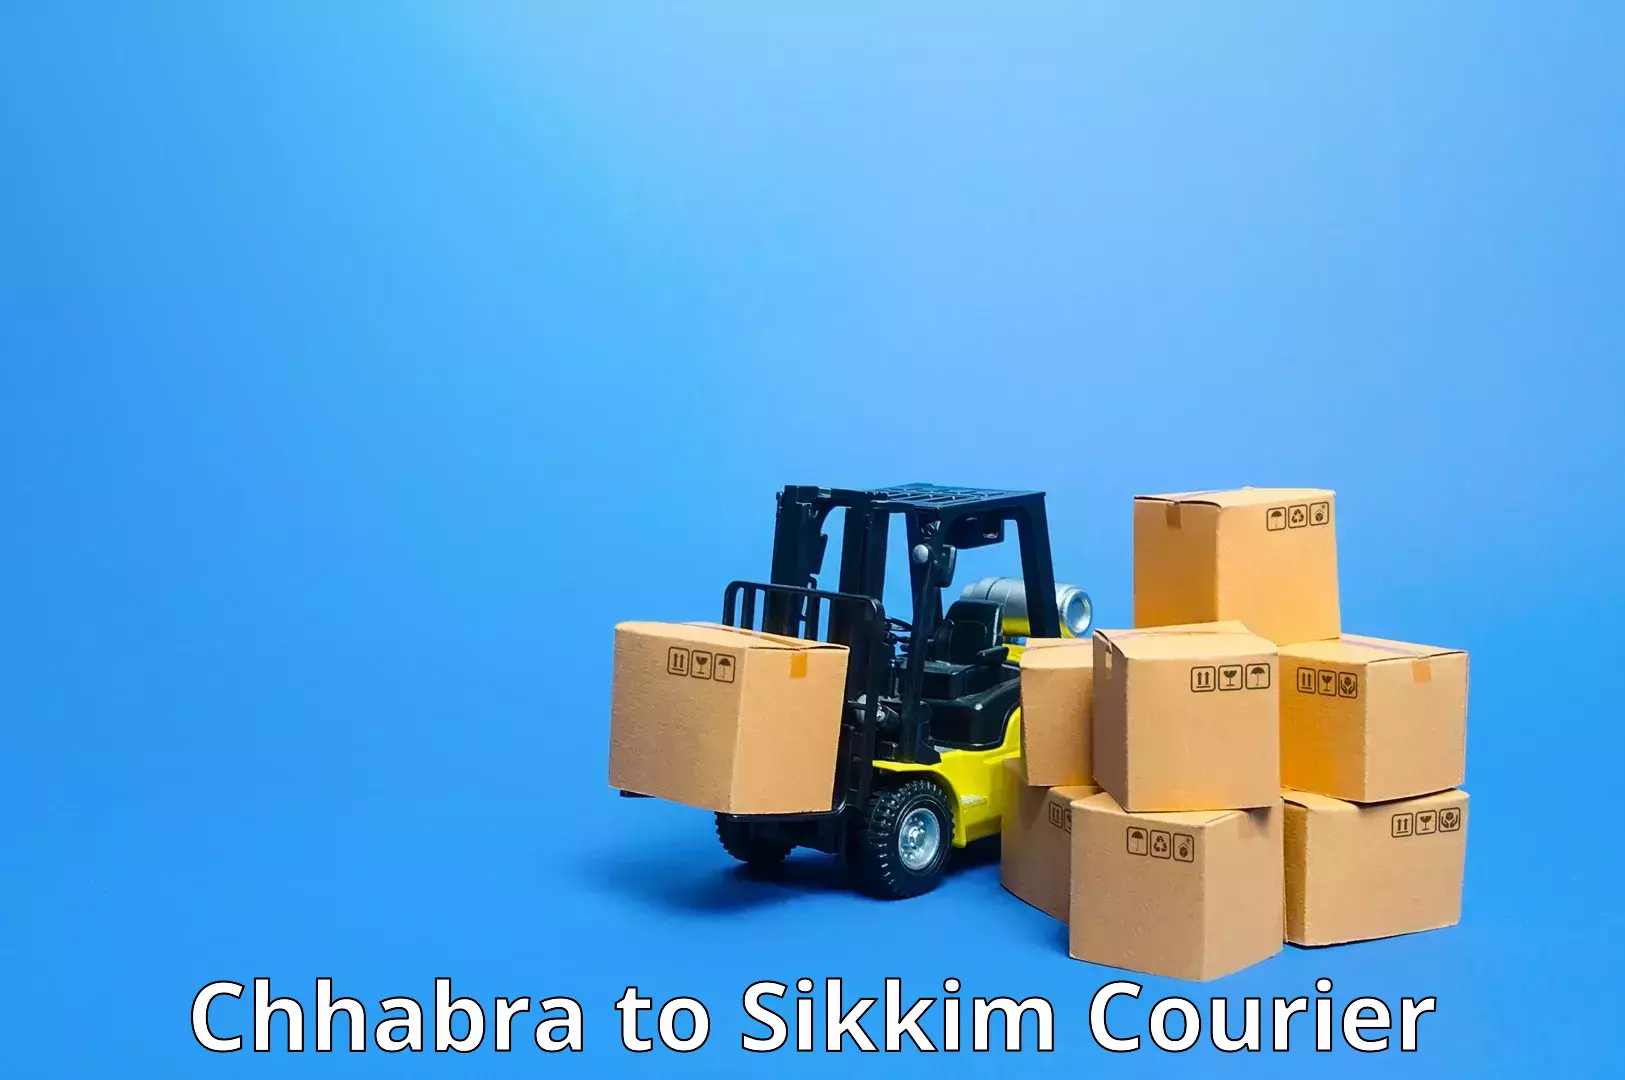 State-of-the-art courier technology Chhabra to Sikkim